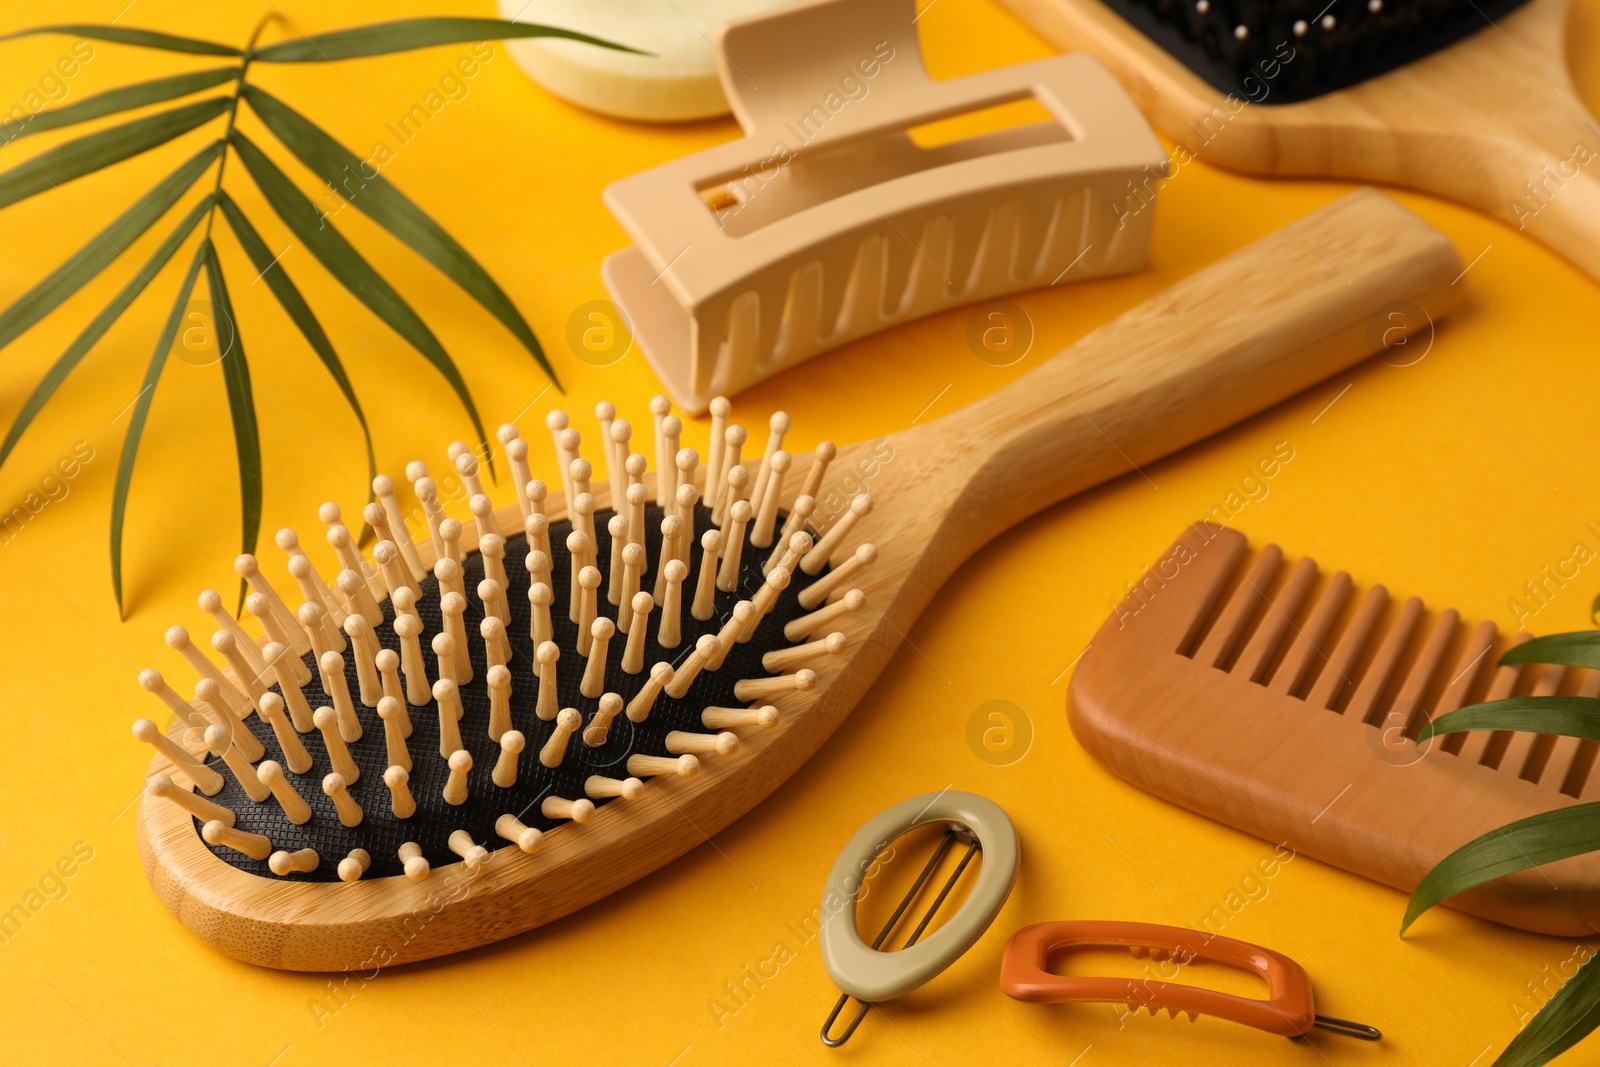 Photo of Wooden brushes, comb and different hair products on orange background